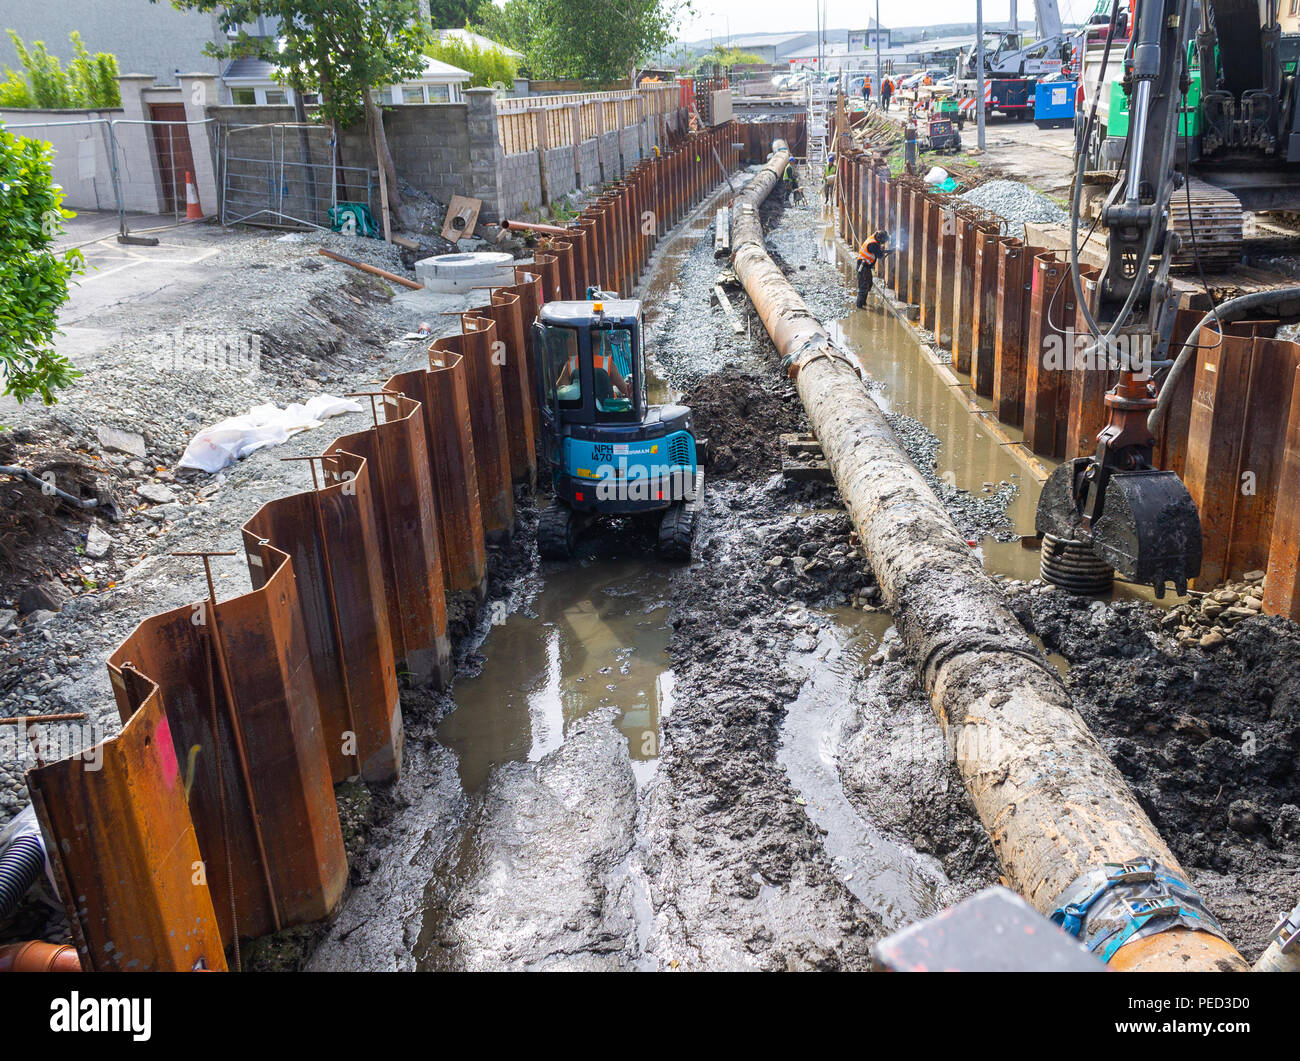 mini digger working on an excavation trench next to a pipeline next to metal shuttering. Stock Photo